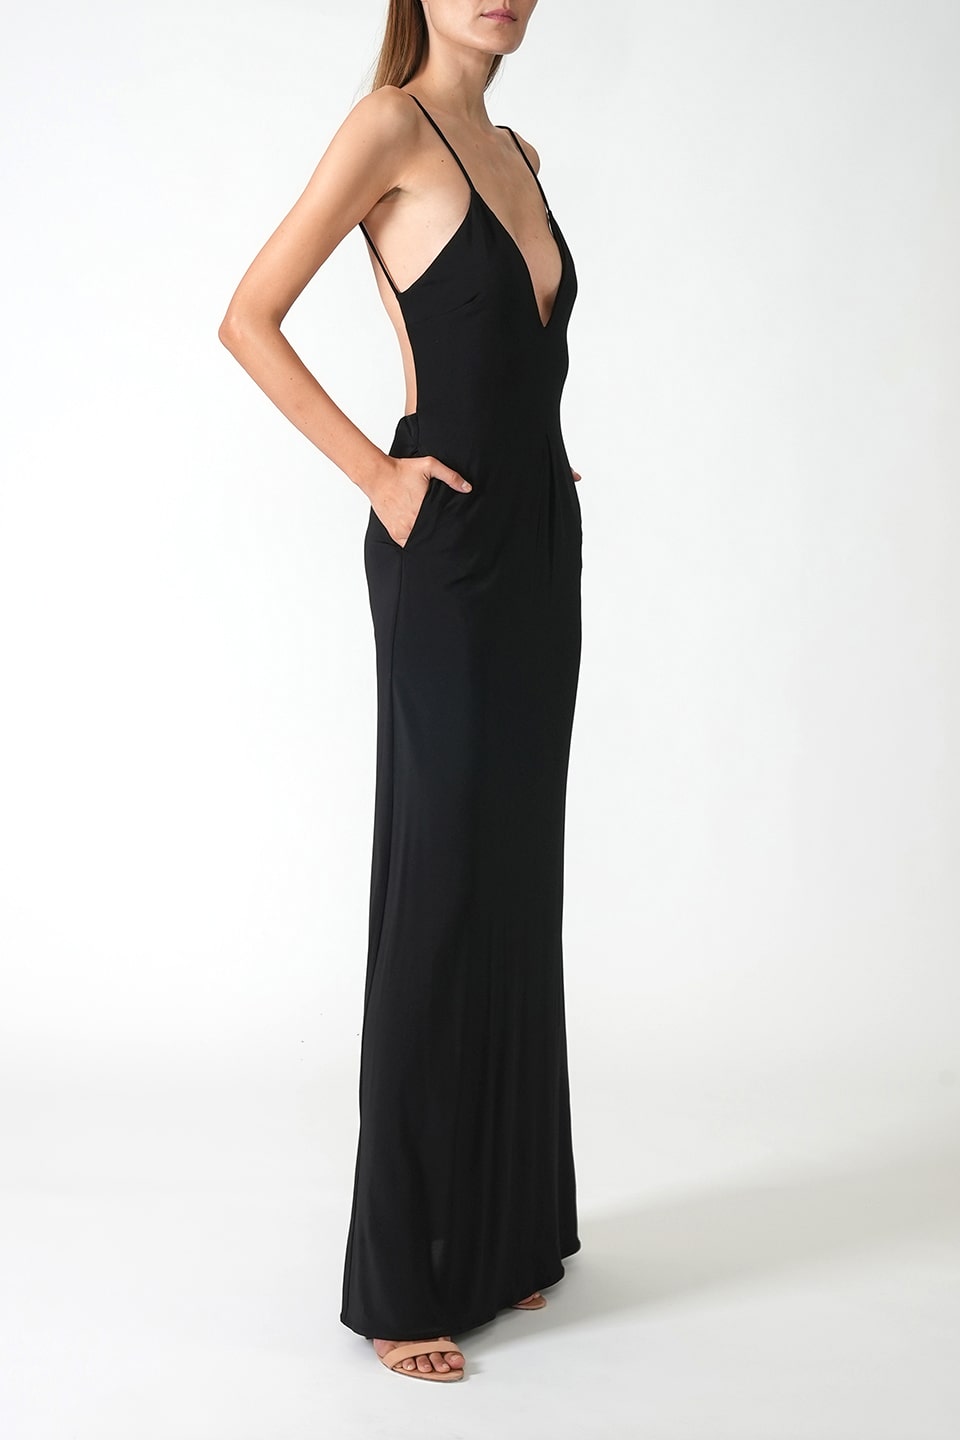 Thumbnail for Product gallery 3, Backless Long Dress Black